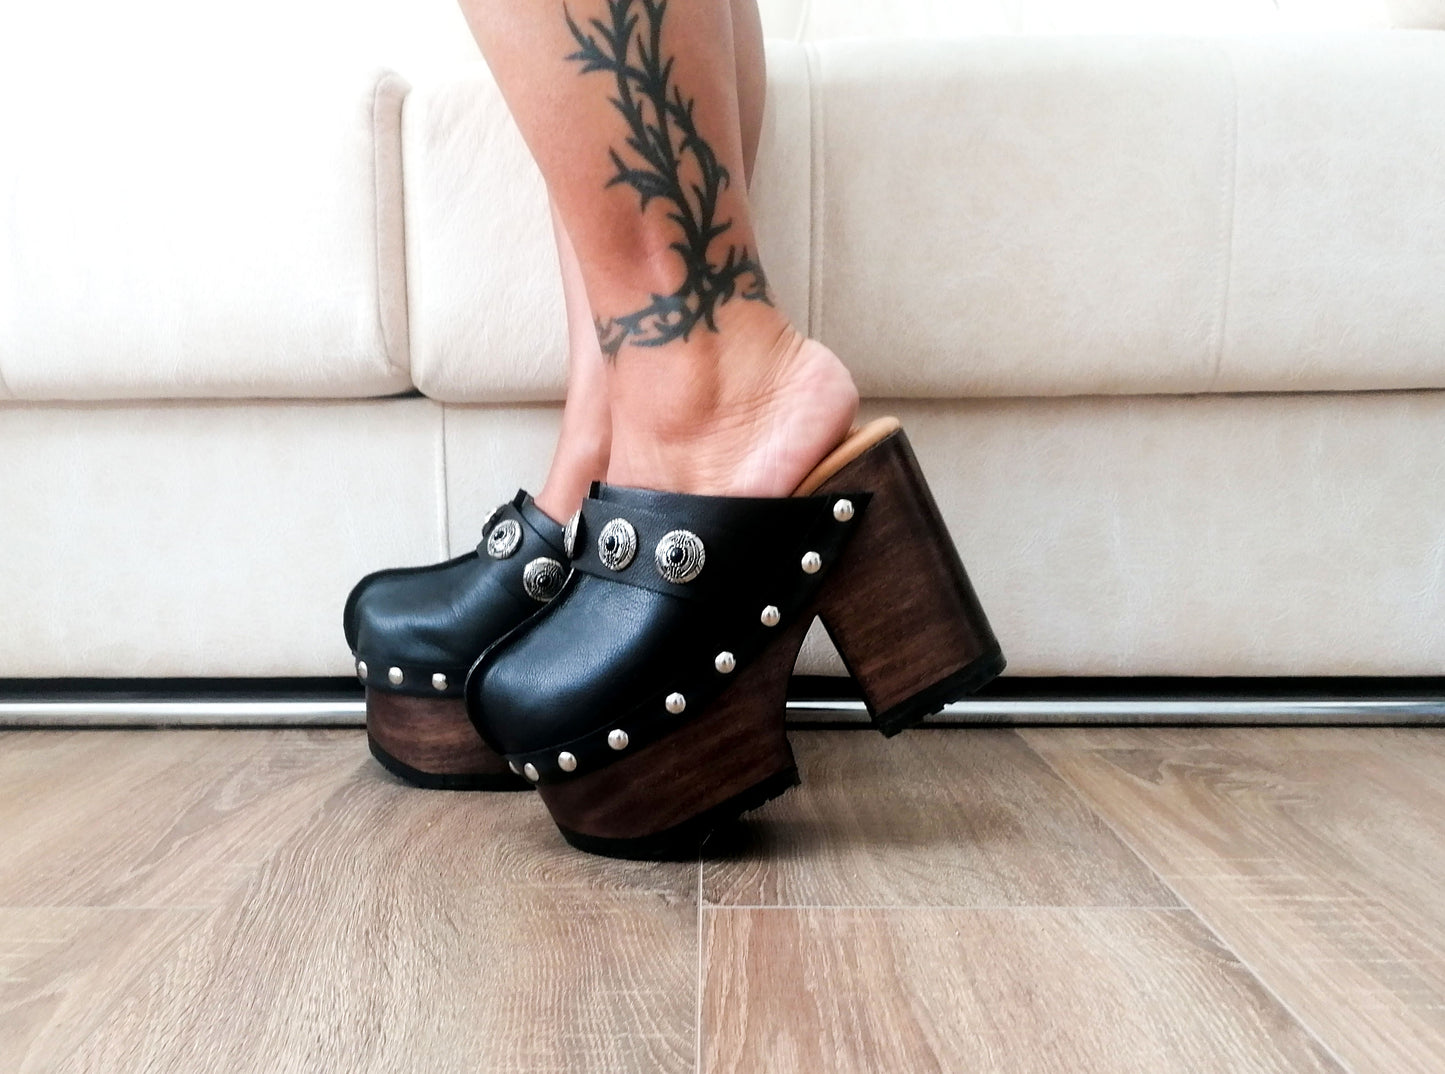 Vintage style black leather clogs. Super high heel clog decorated with vintage silver conchos. Bohemian style mule. Vintage 70's style platform clogs. Sizes 34 to 47. High quality leather shoes handmade by sol Caleyo. Sustainable fashion.